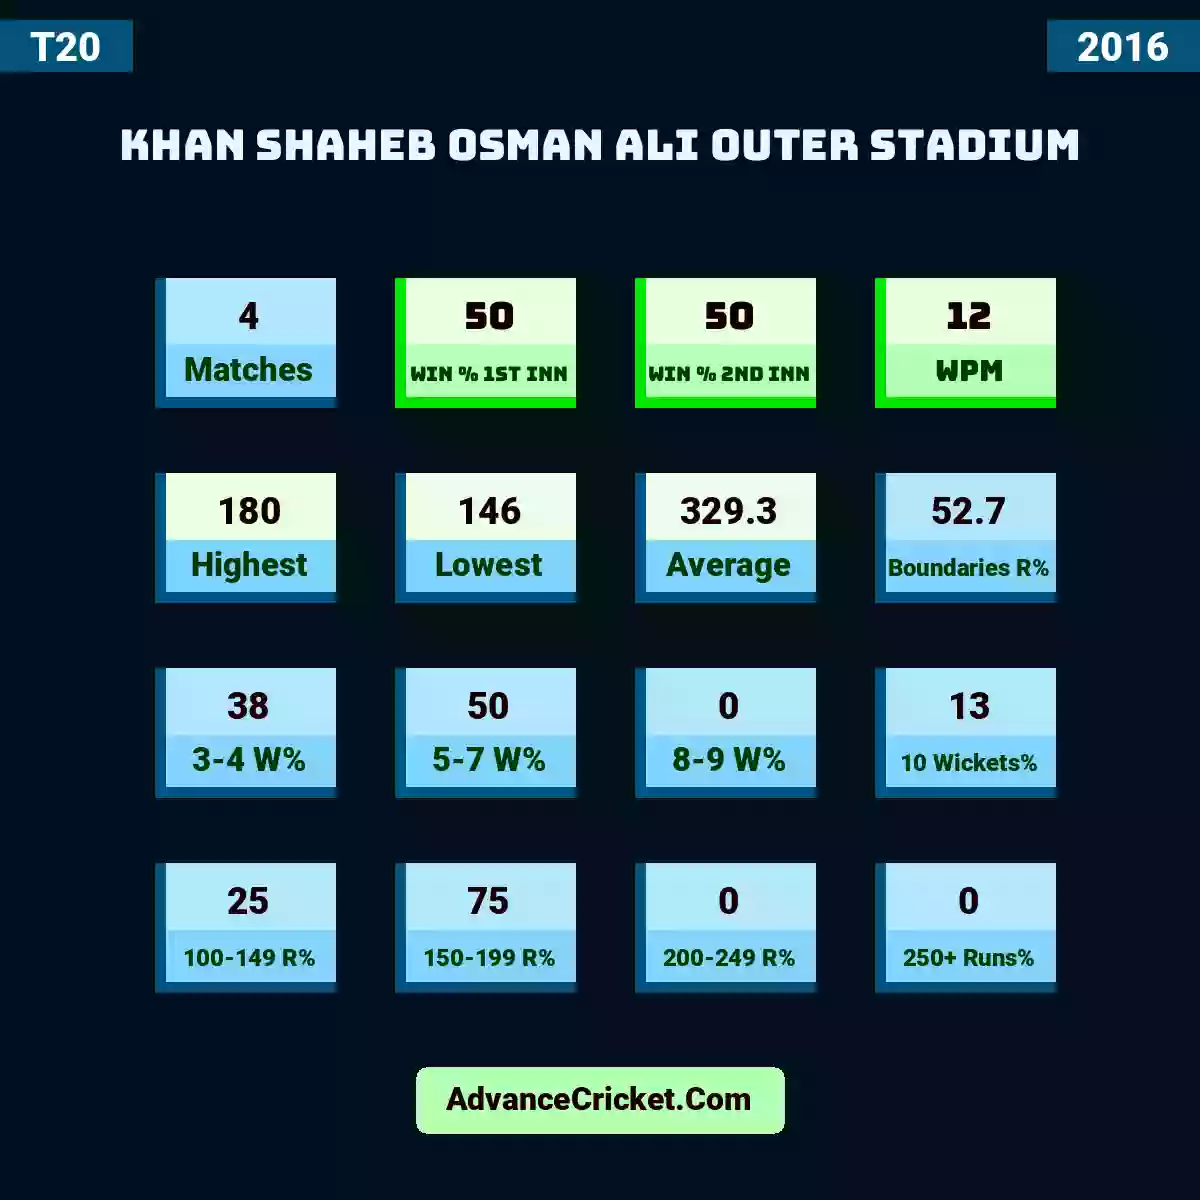 Image showing Khan Shaheb Osman Ali Outer Stadium with Matches: 4, Win % 1st Inn: 50, Win % 2nd Inn: 50, WPM: 12, Highest: 180, Lowest: 146, Average: 329.3, Boundaries R%: 52.7, 3-4 W%: 38, 5-7 W%: 50, 8-9 W%: 0, 10 Wickets%: 13, 100-149 R%: 25, 150-199 R%: 75, 200-249 R%: 0, 250+ Runs%: 0.